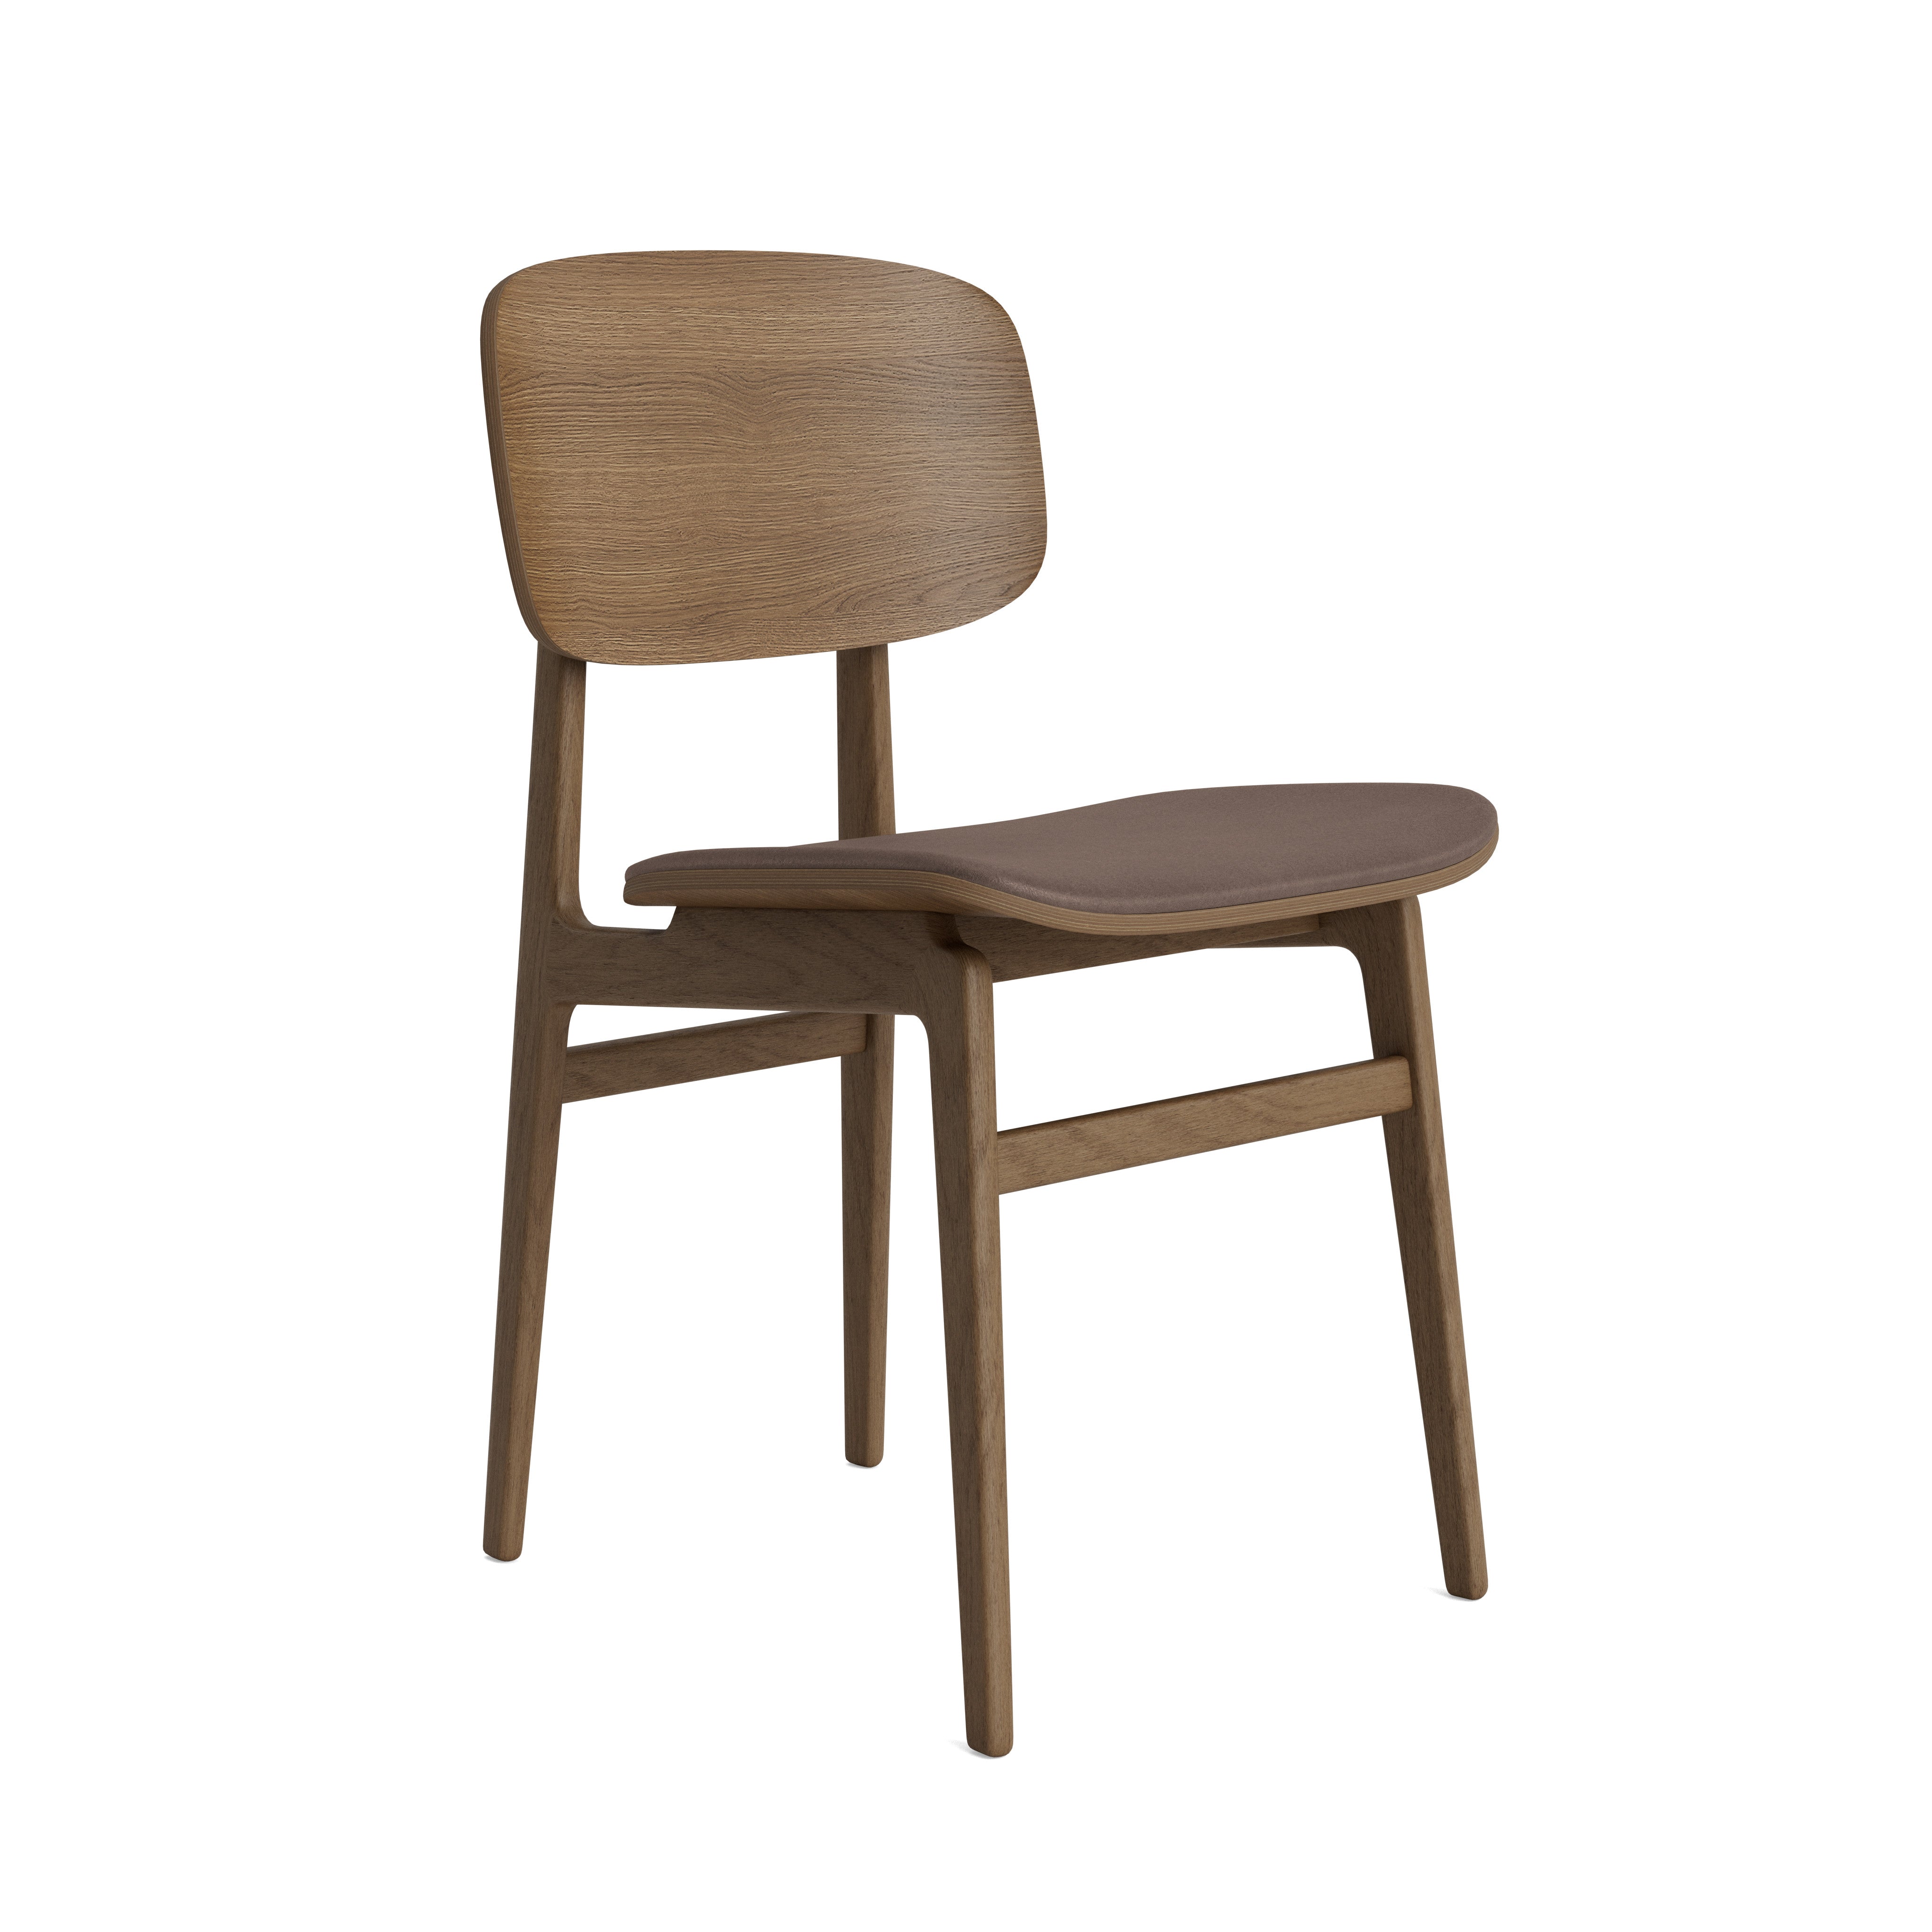 NY11 Chair |Leather Seat